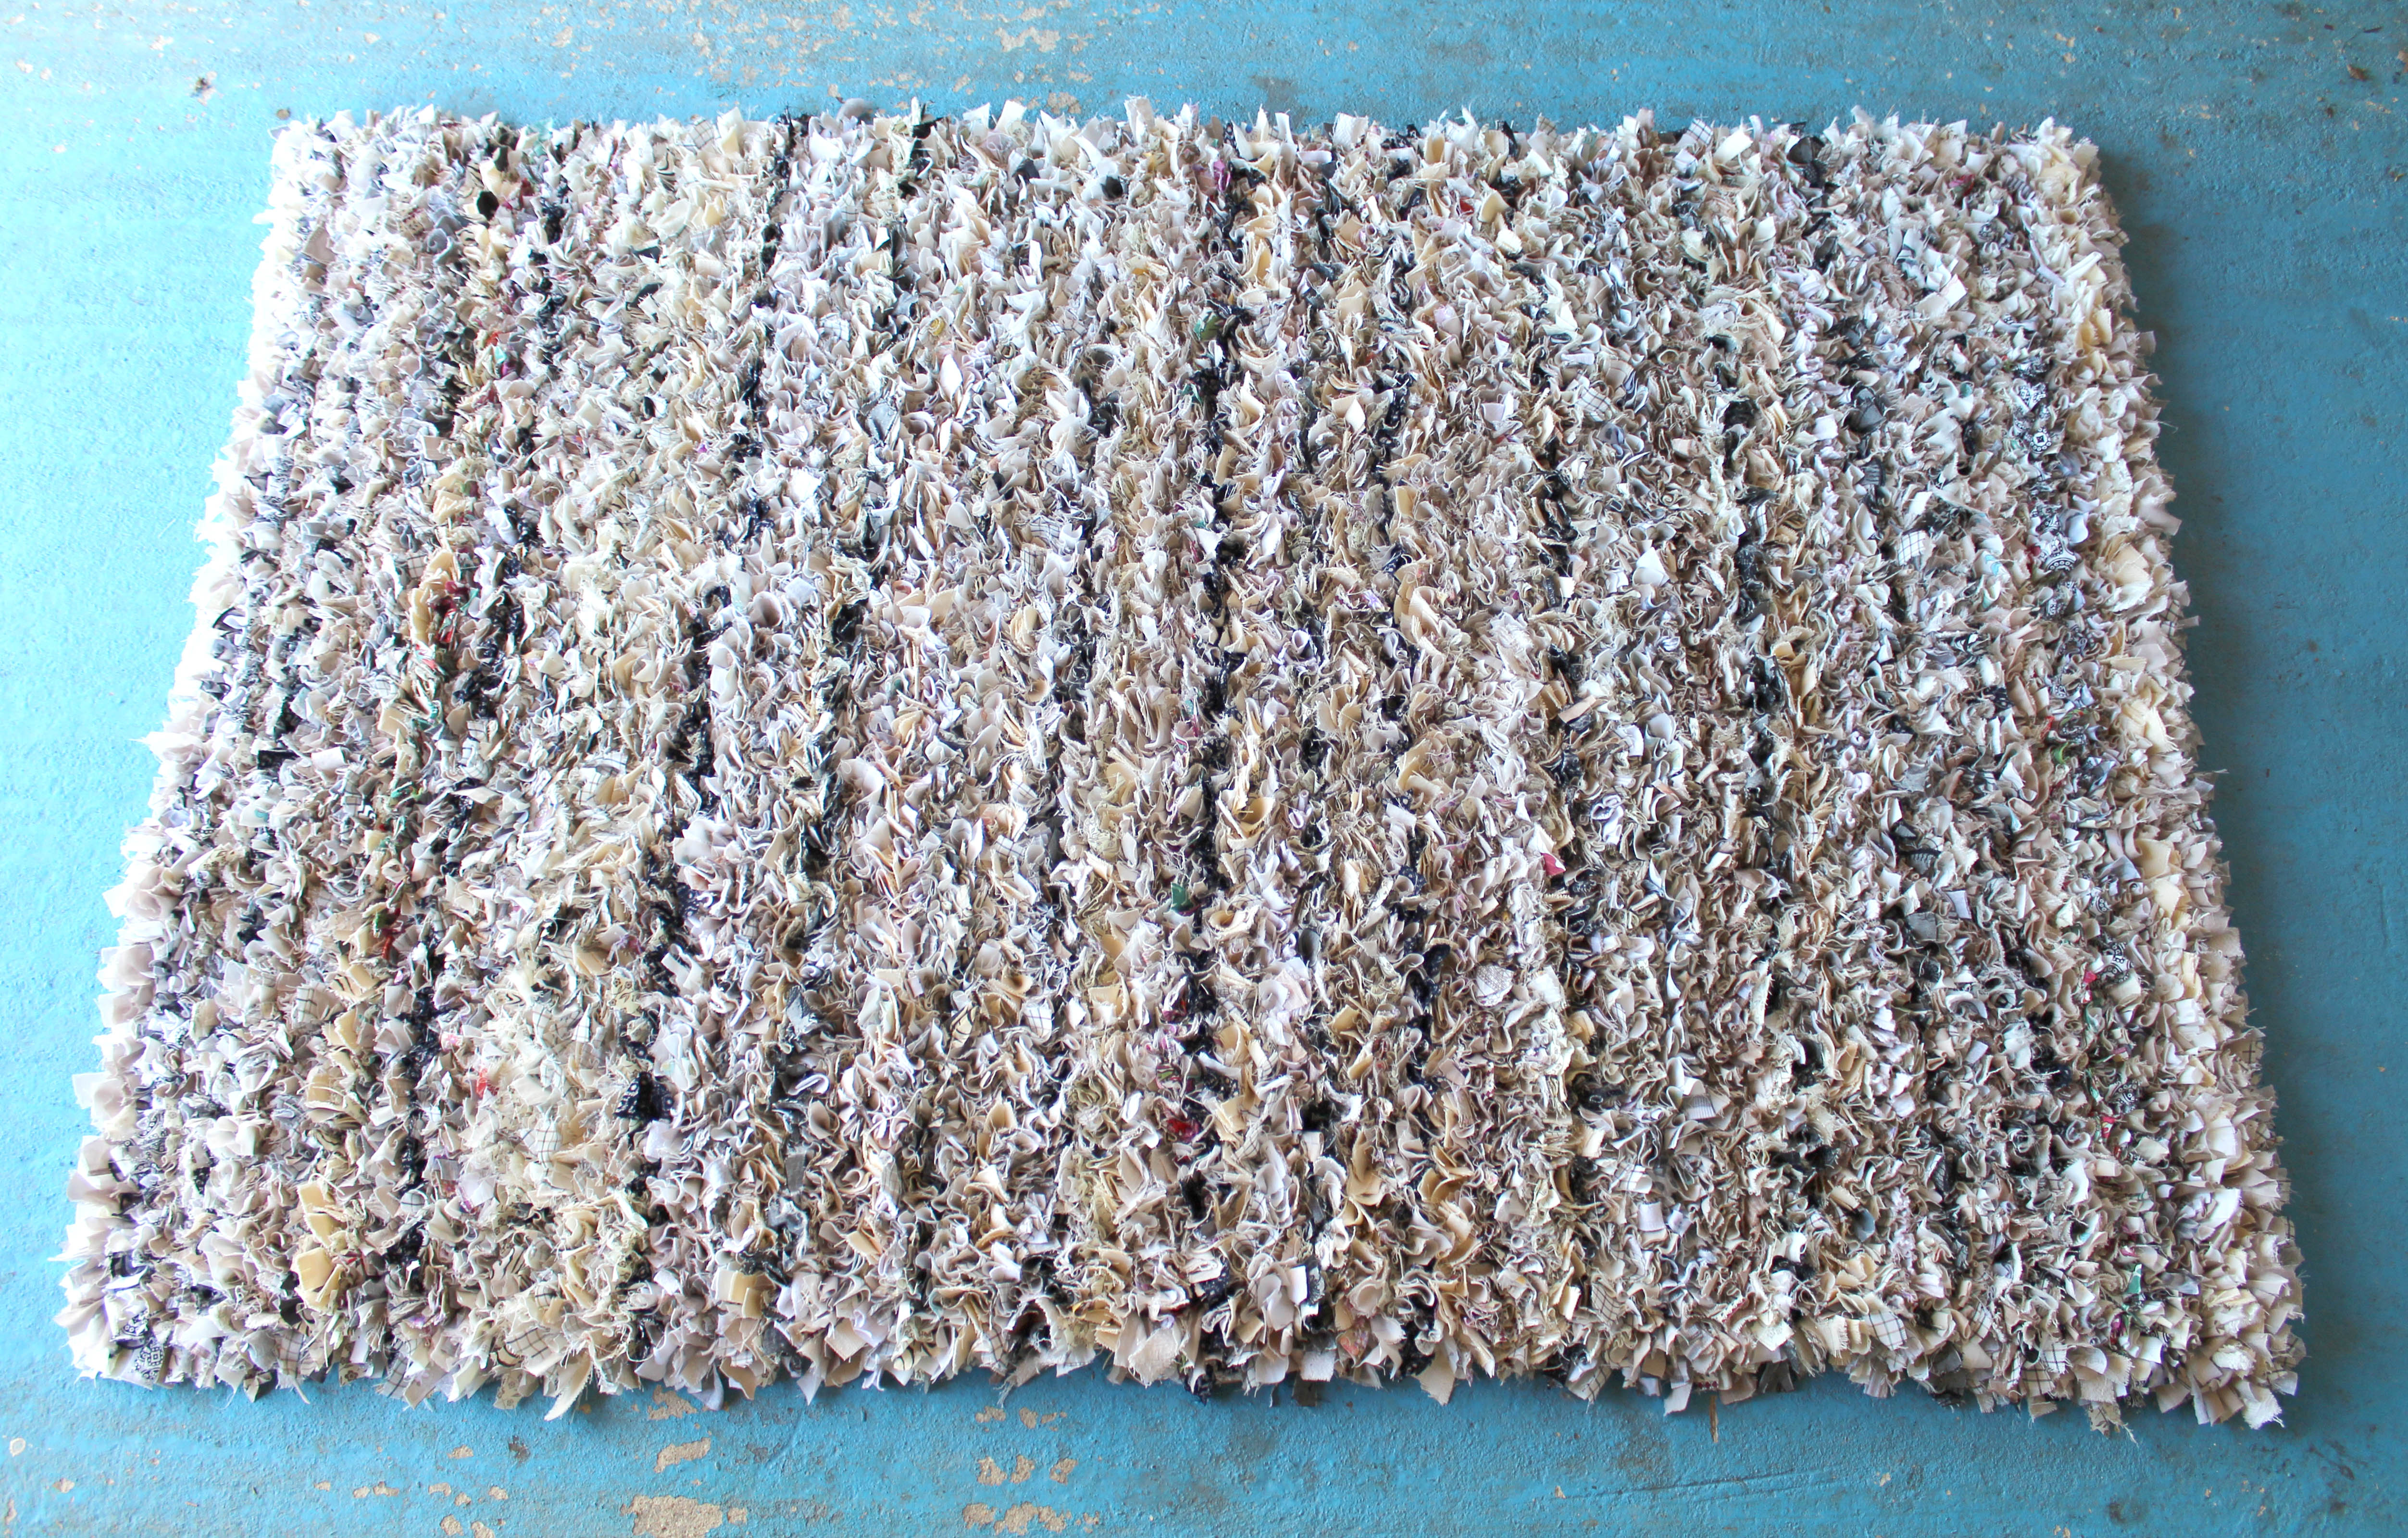 Cream Rag Rug Commission designed with stripes of cream, grey and white